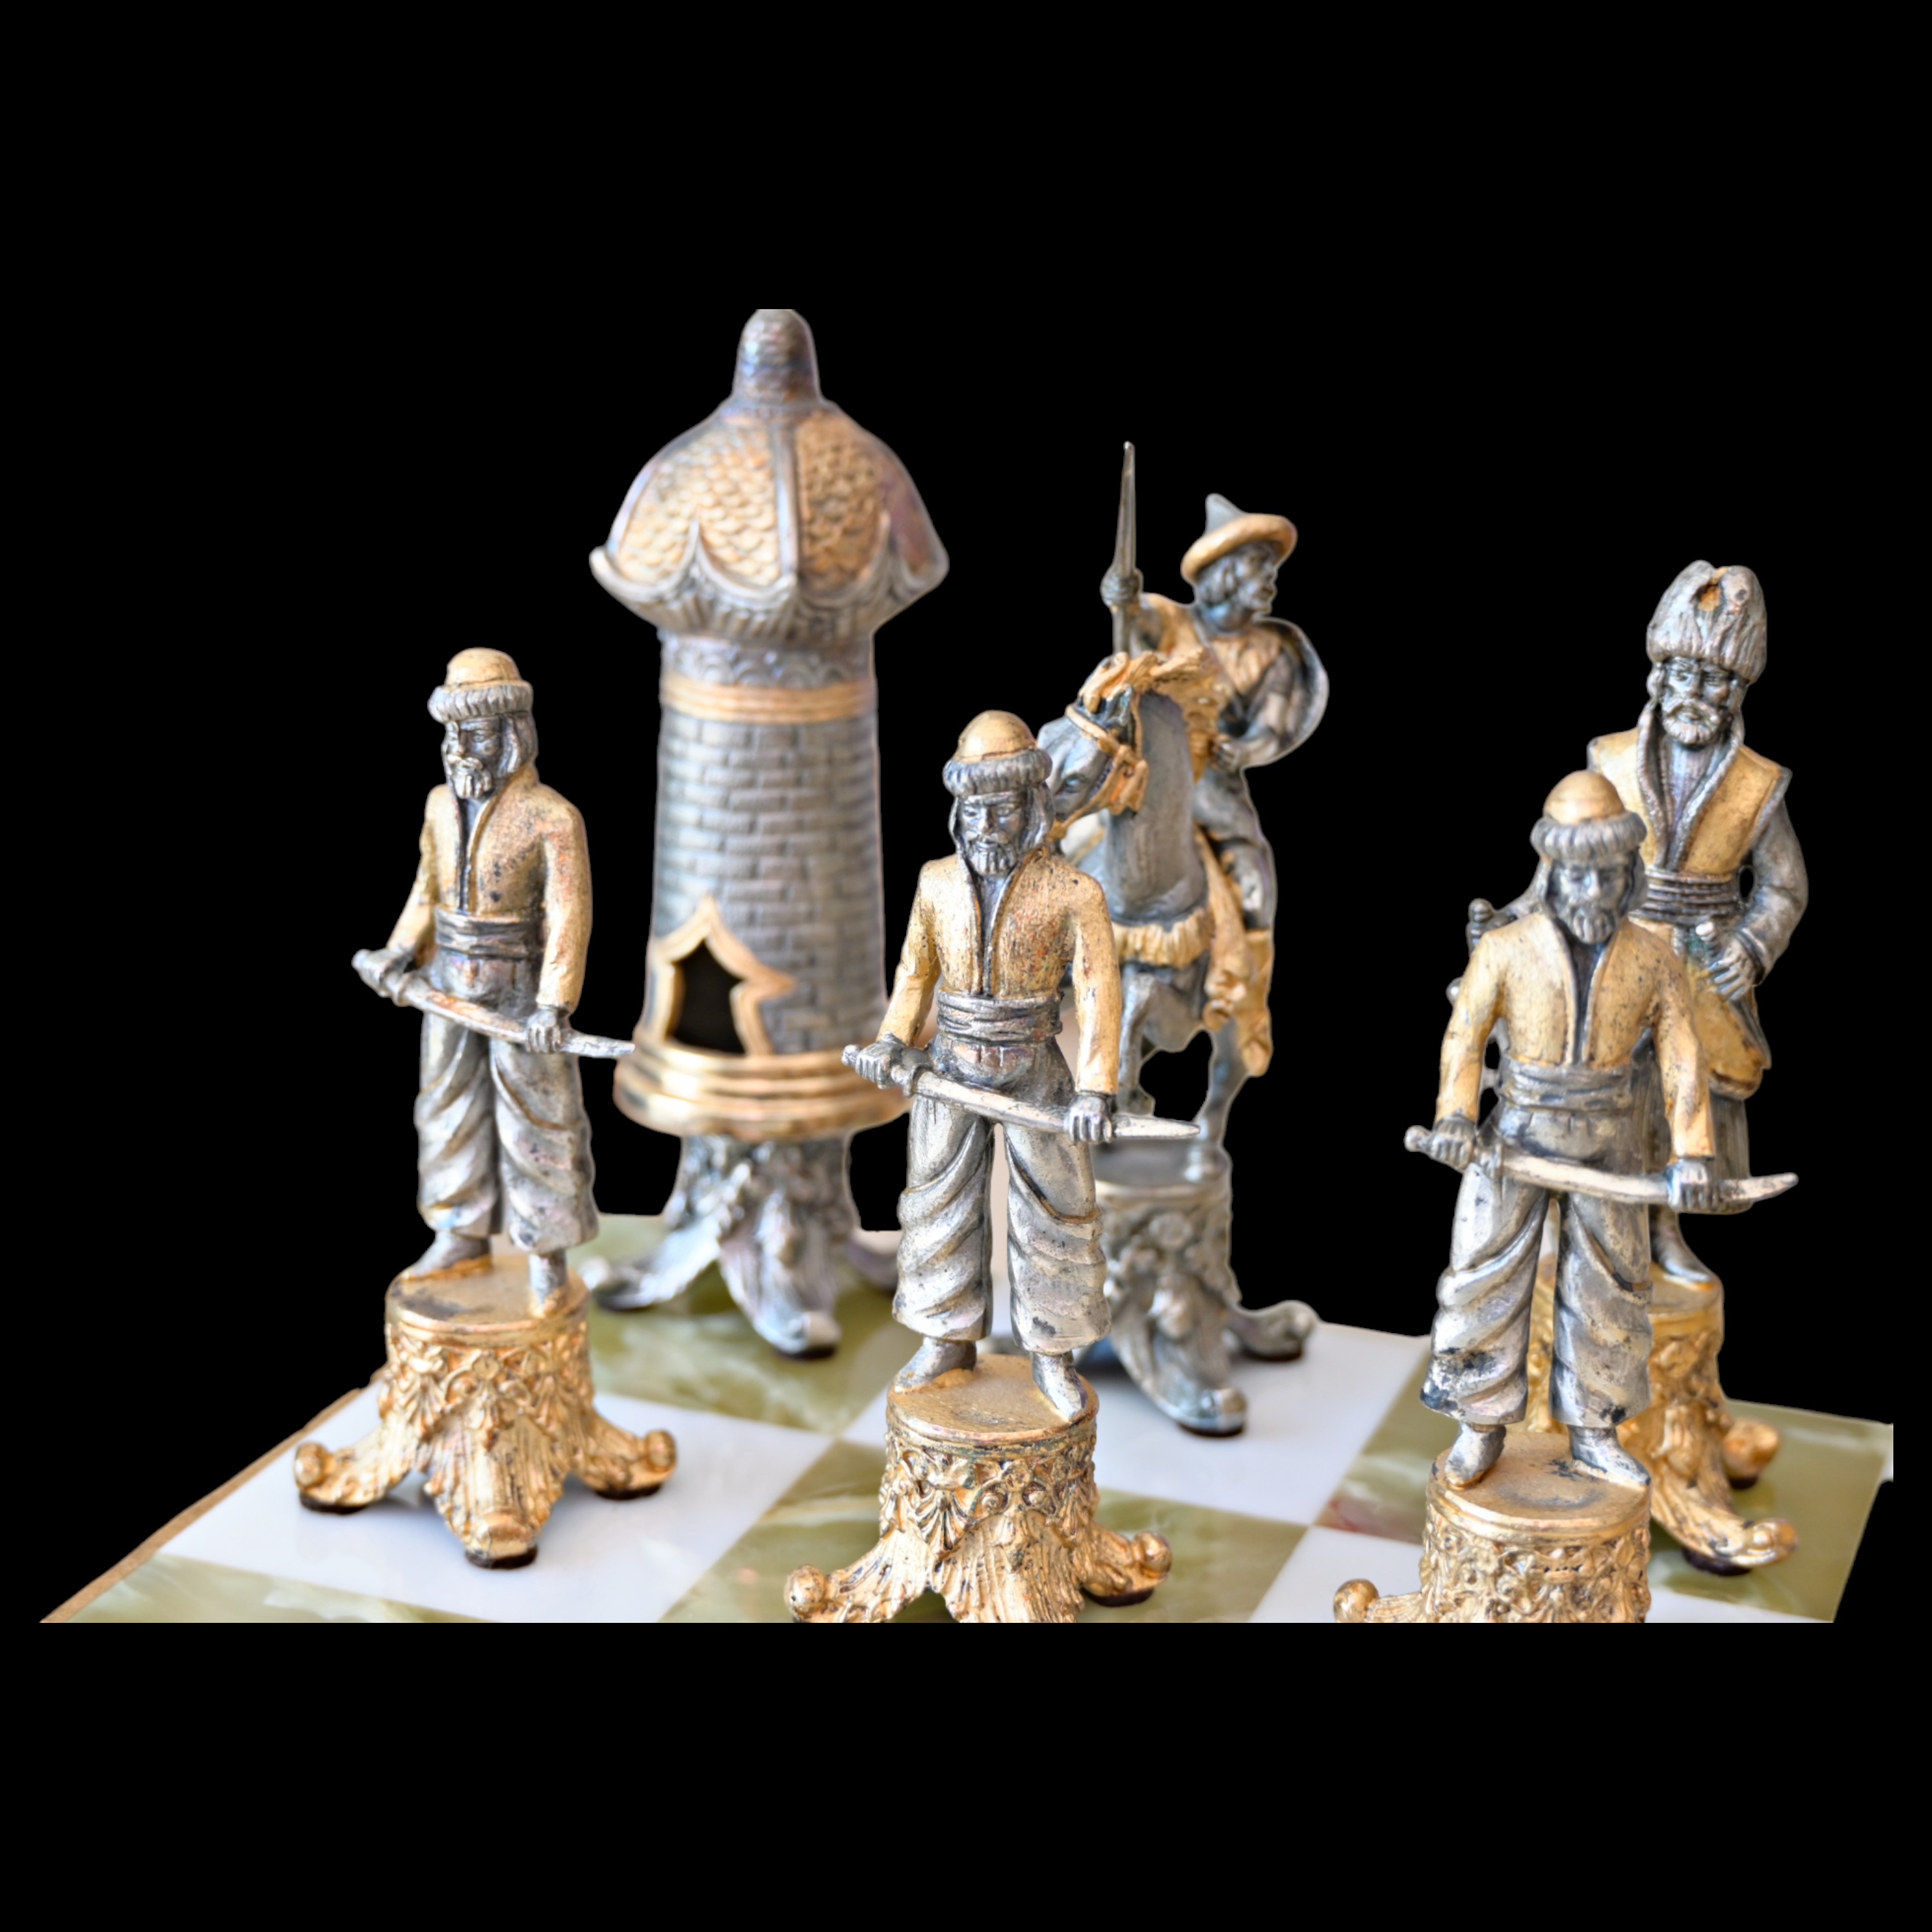 Piero Benzoni Onyx and Marble Silver-Plated and Gilt Bronze Chess Set, 70-80 years of the 20th _. - Image 10 of 13